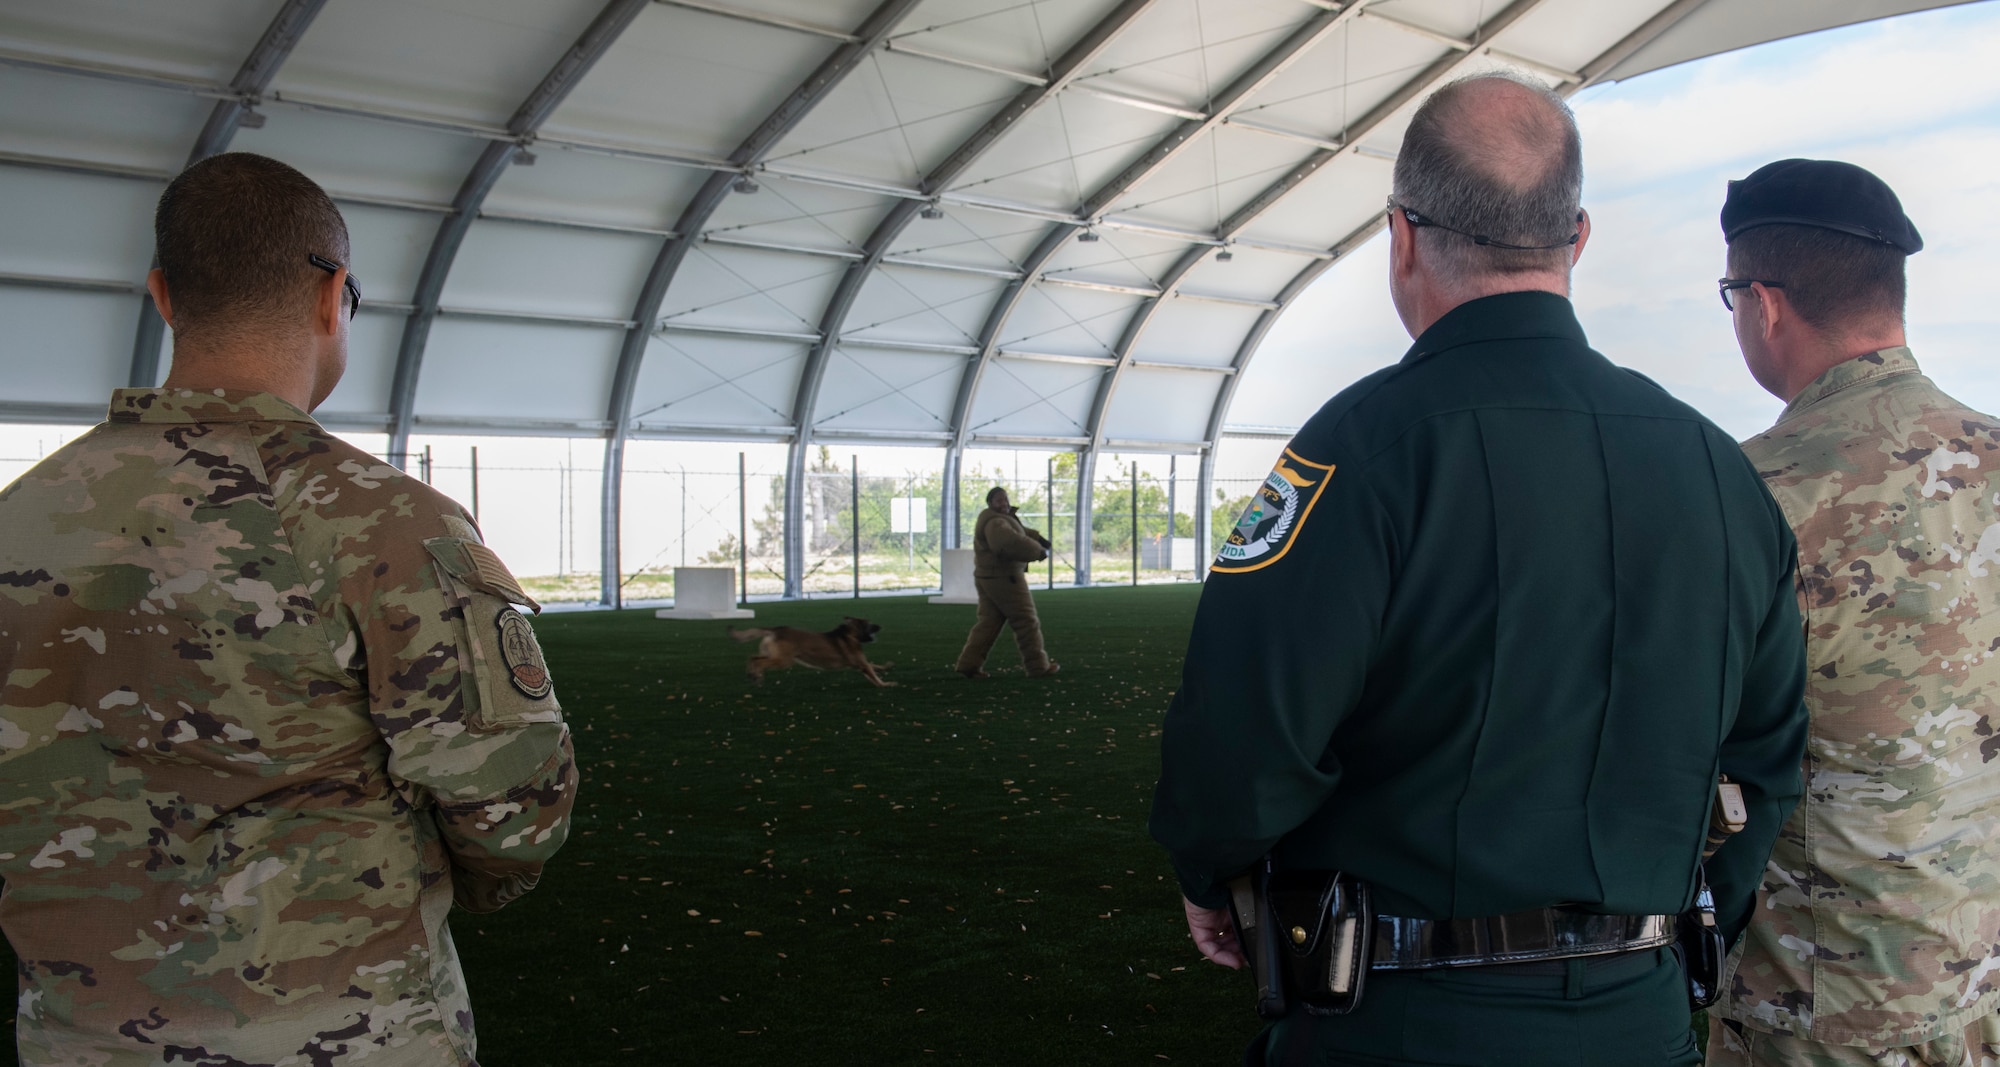 From left, U.S. Air Force Tech. Sgt. Marcus Lavalais, 325th Security Forces Squadron kennel master, Tommy Ford, 325th SFS honorary commander, and Maj. Jordan Criss, 325th SFS commander, observe as an Airman demonstrates bite tactics with a military working dog at Tyndall Air Force Base, Florida, April 13, 2022.